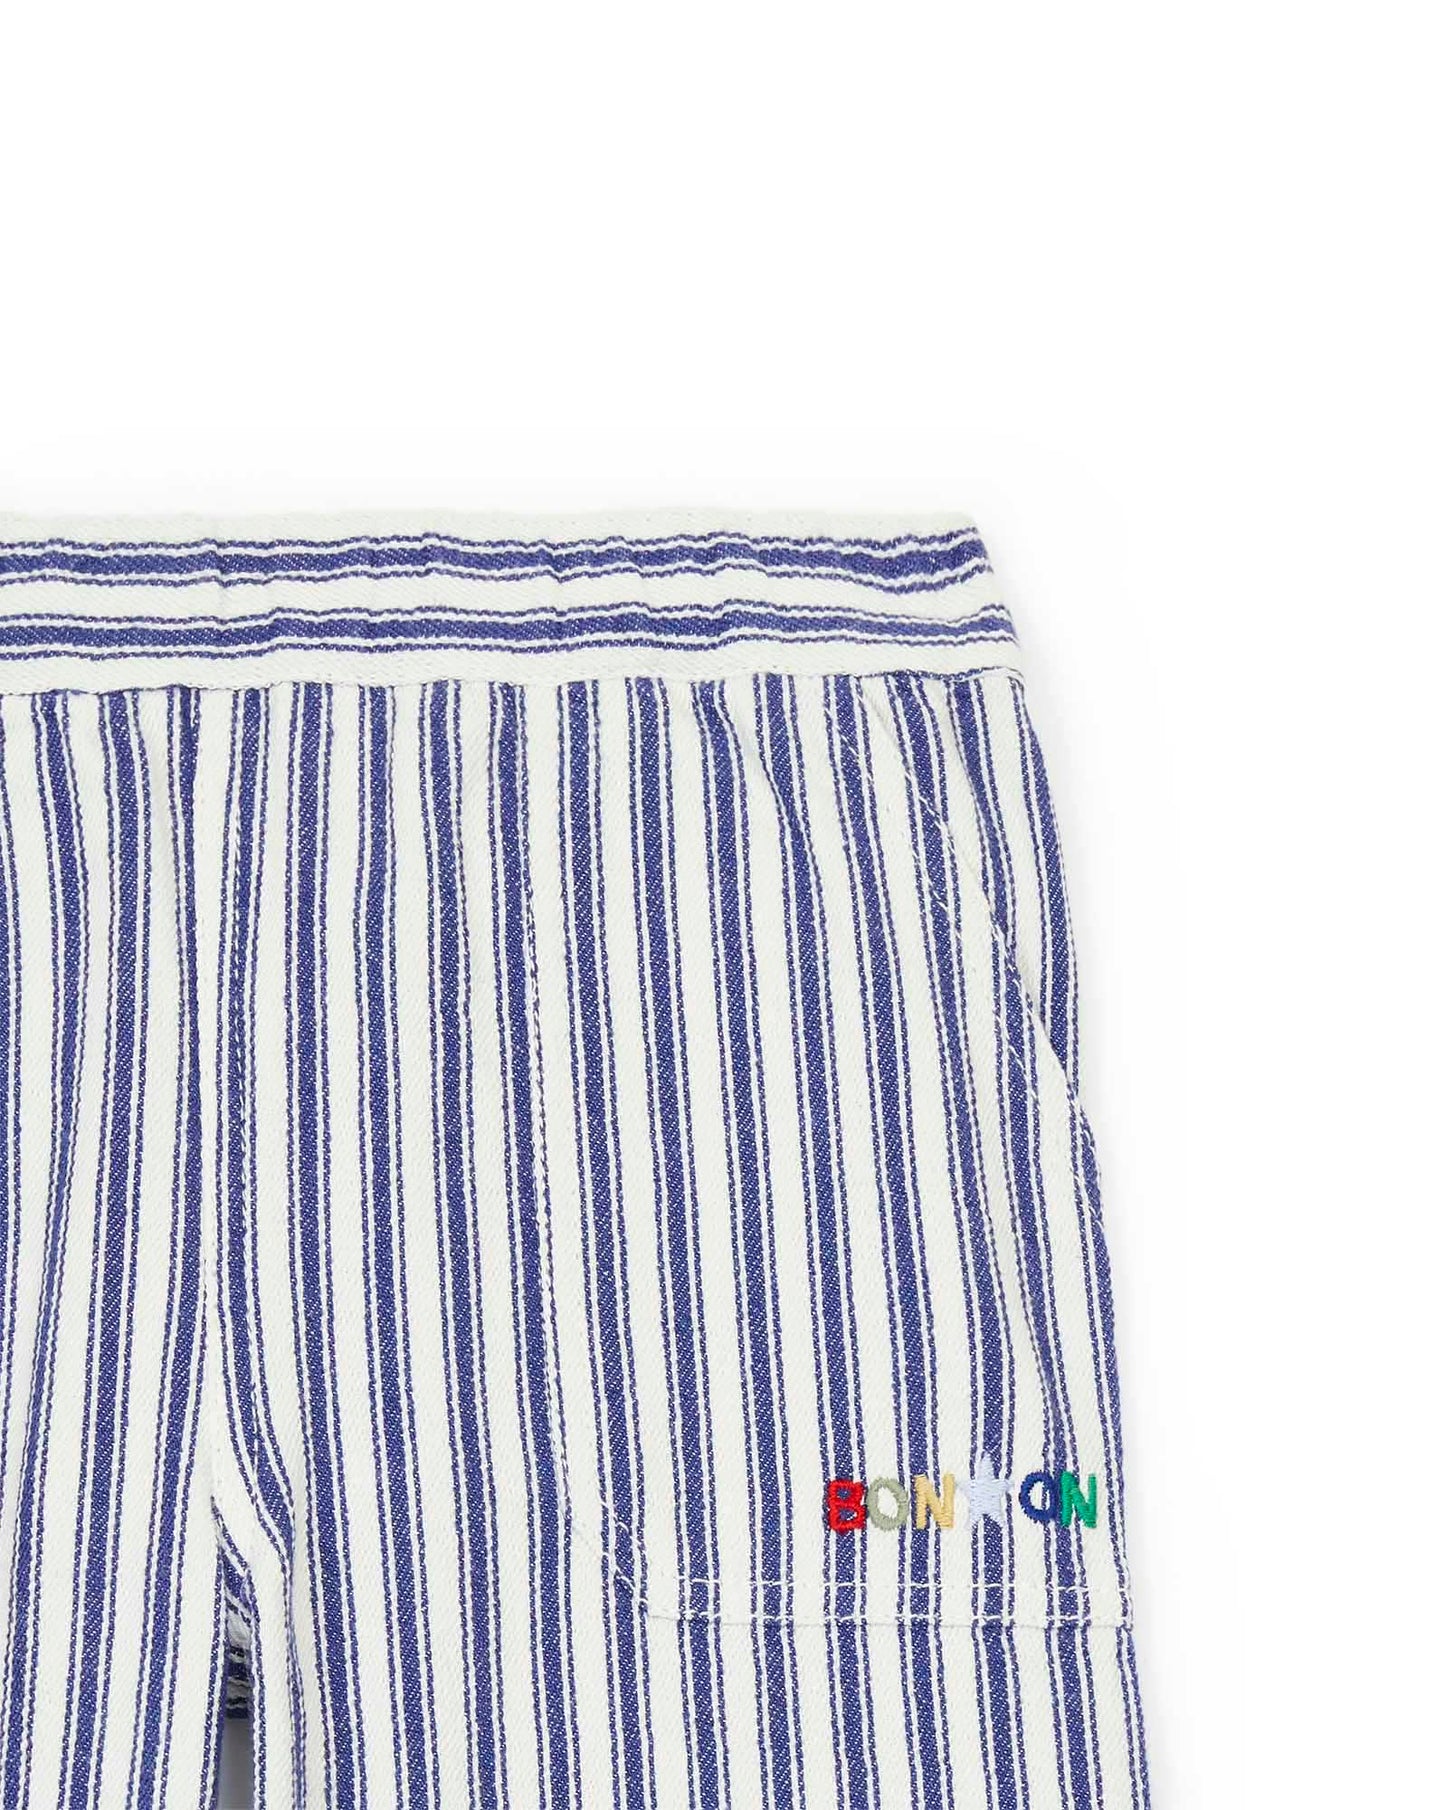 Trousers - itcha Blue Striped cotton twill